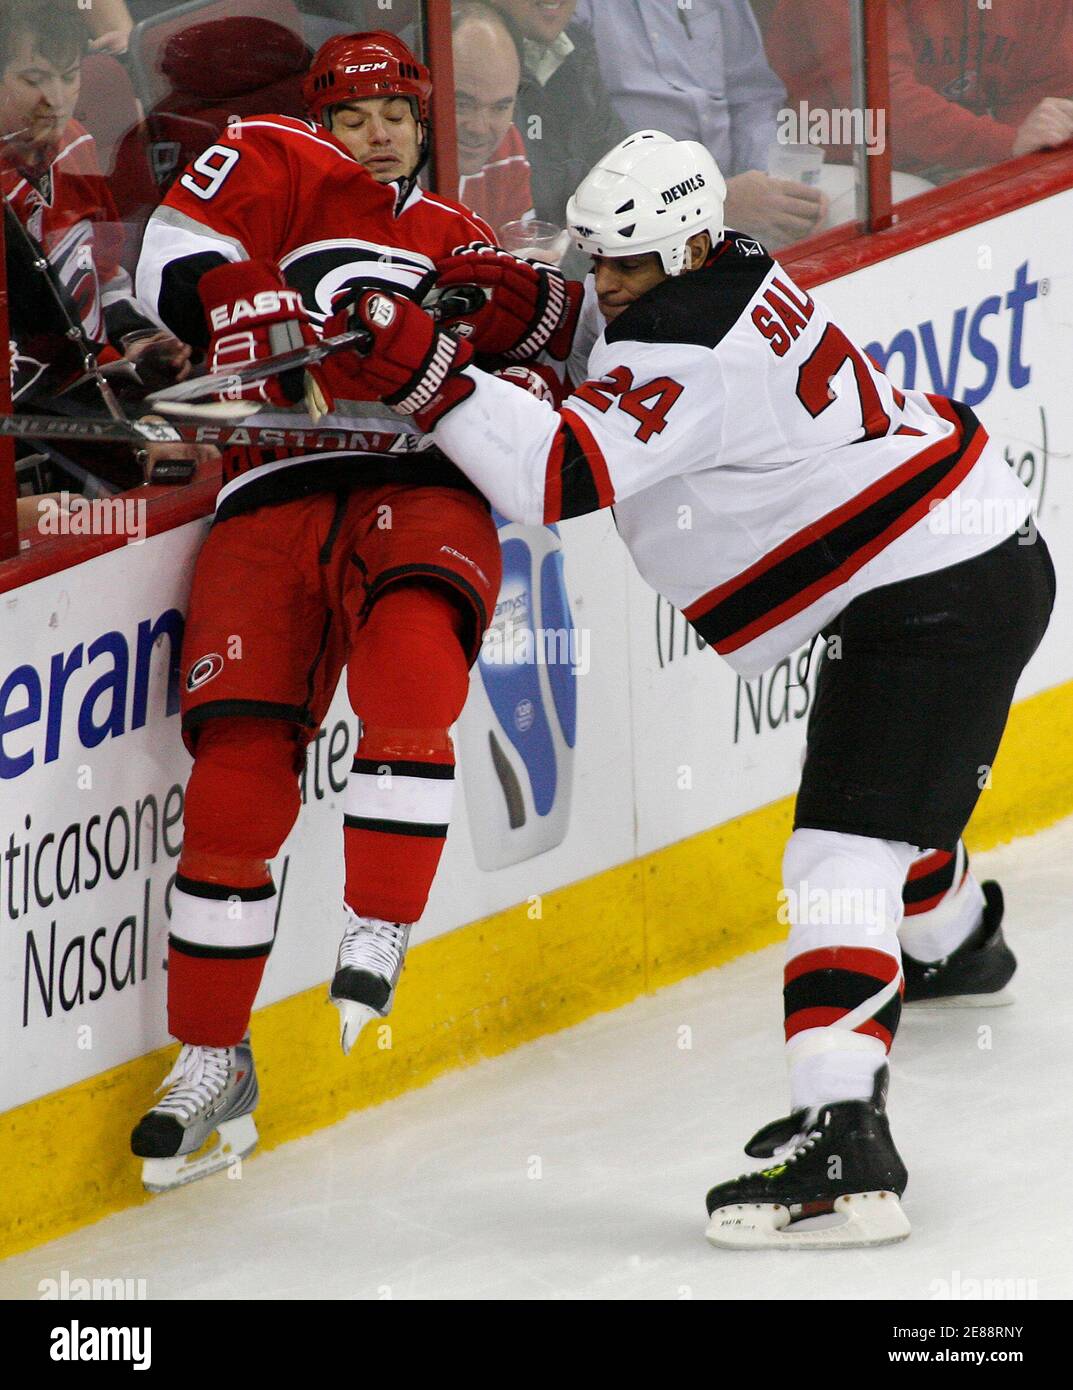 New Jersey Devils' Bryce Salvador checks the Carolina Hurricanes' Chad  LaRose during their NHL hockey game in Raleigh, North Carolina March 18,  2009. REUTERS/Ellen Ozier (UNITED STATES SPORT ICE HOCKEY Stock Photo -